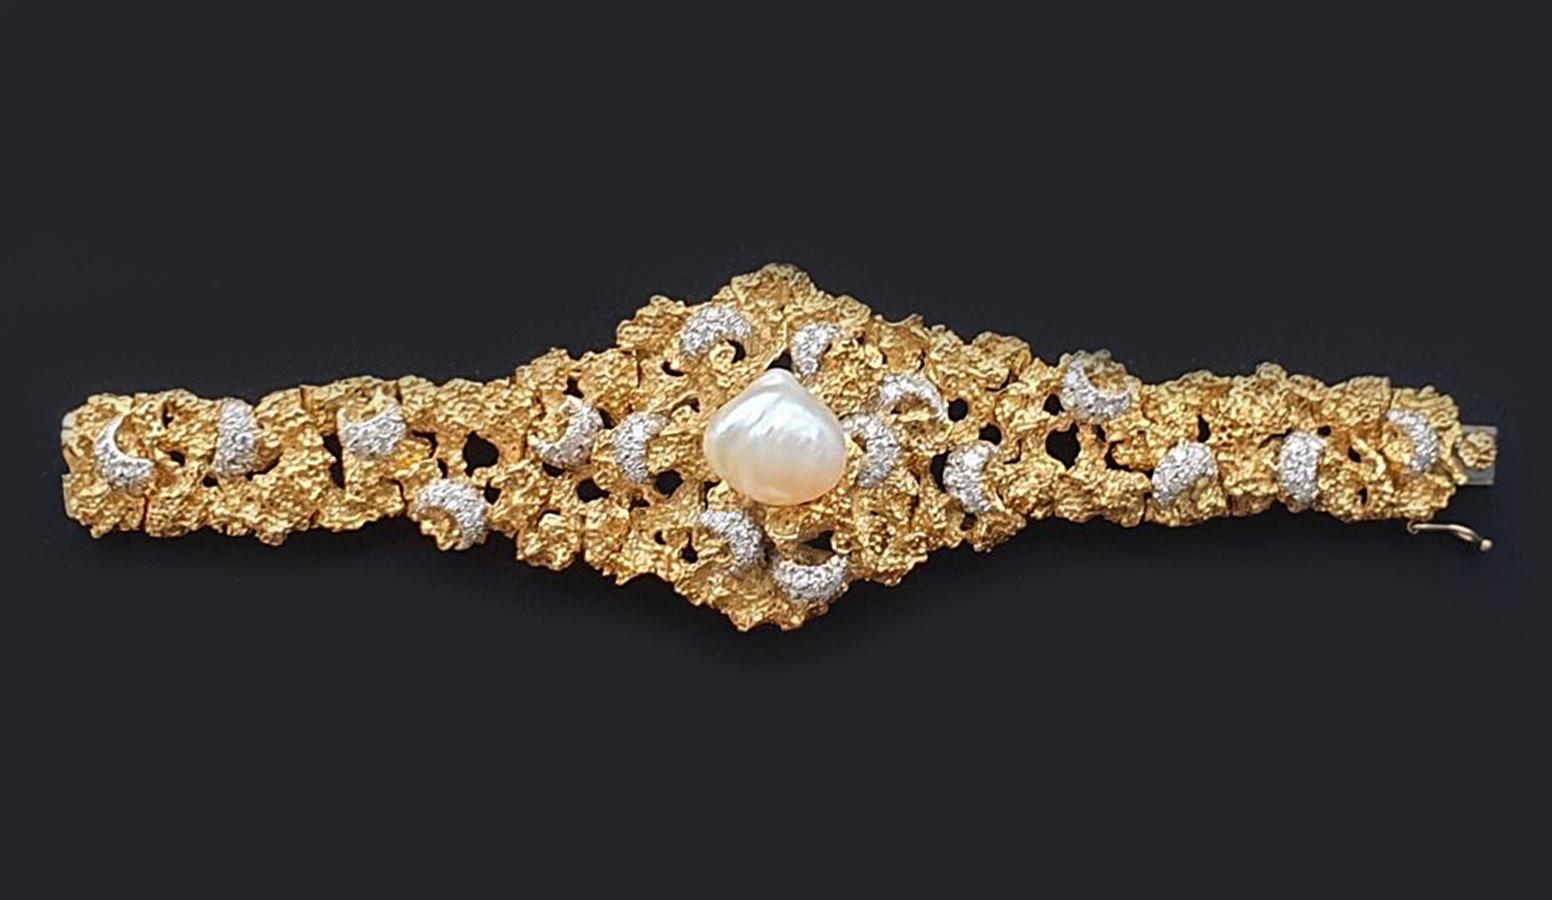 This Baroque Pearl and Diamond Bracelet is an elegant piece of jewelry that features a beautiful, irregularly-shaped pearl as its centerpiece. The pearl is surrounded by sparkling diamonds set in 18K yellow gold, which gives the bracelet a unique